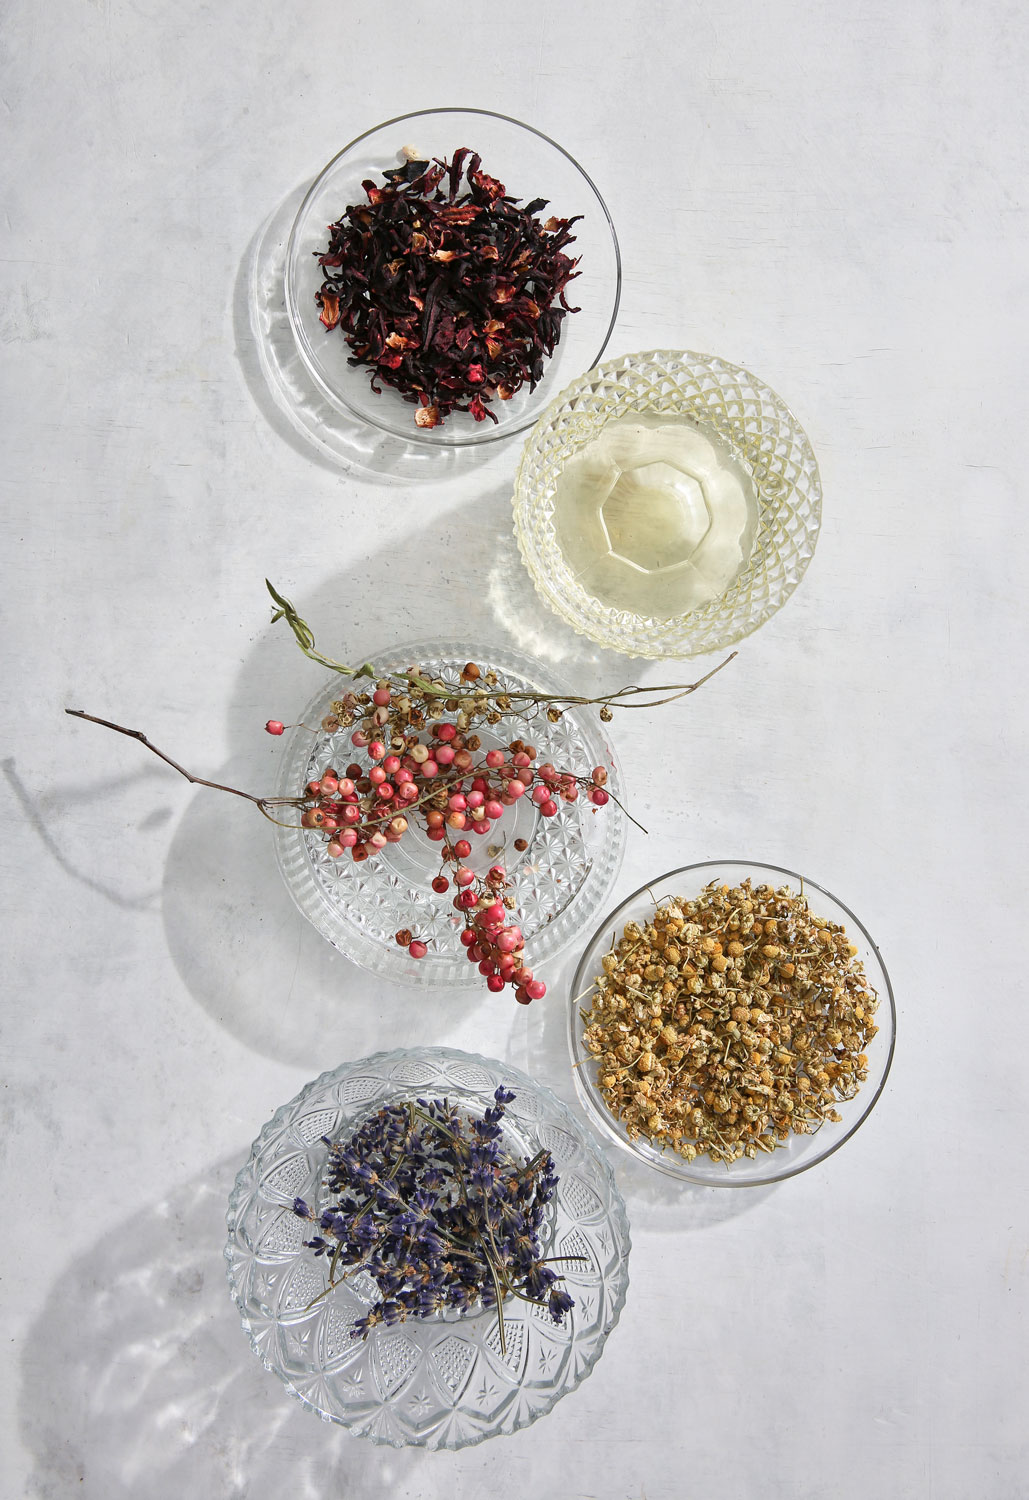 Botanical bath ingredients peppercorn, chamomile lavender and rosehips